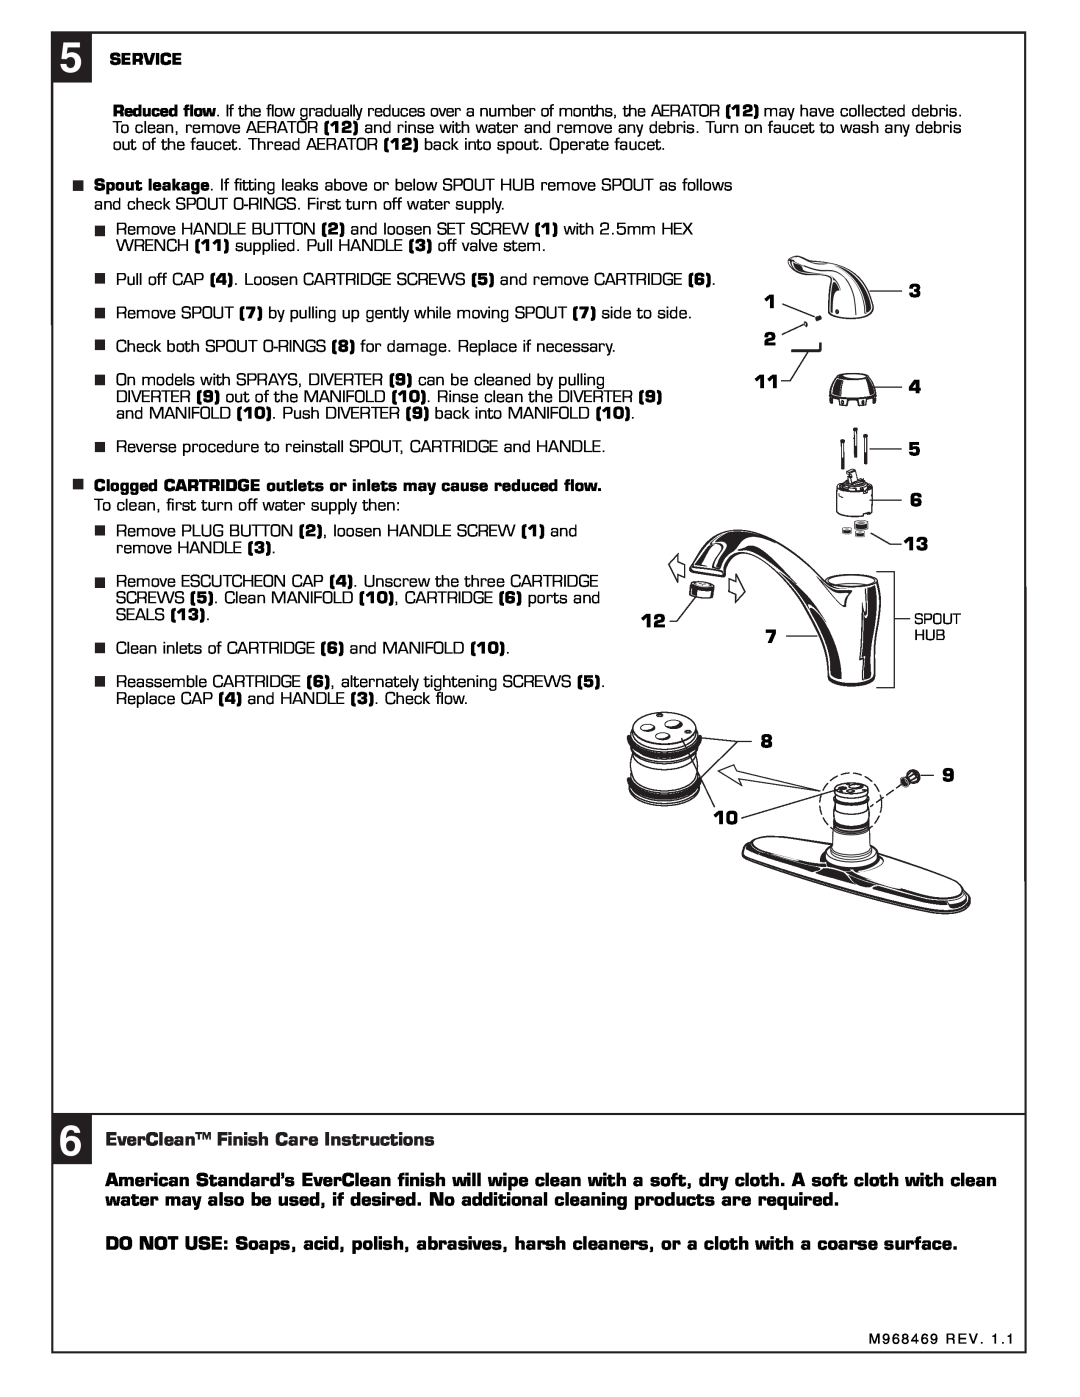 American Standard 4114.003, 4114.001 installation instructions EverClean Finish Care Instructions 